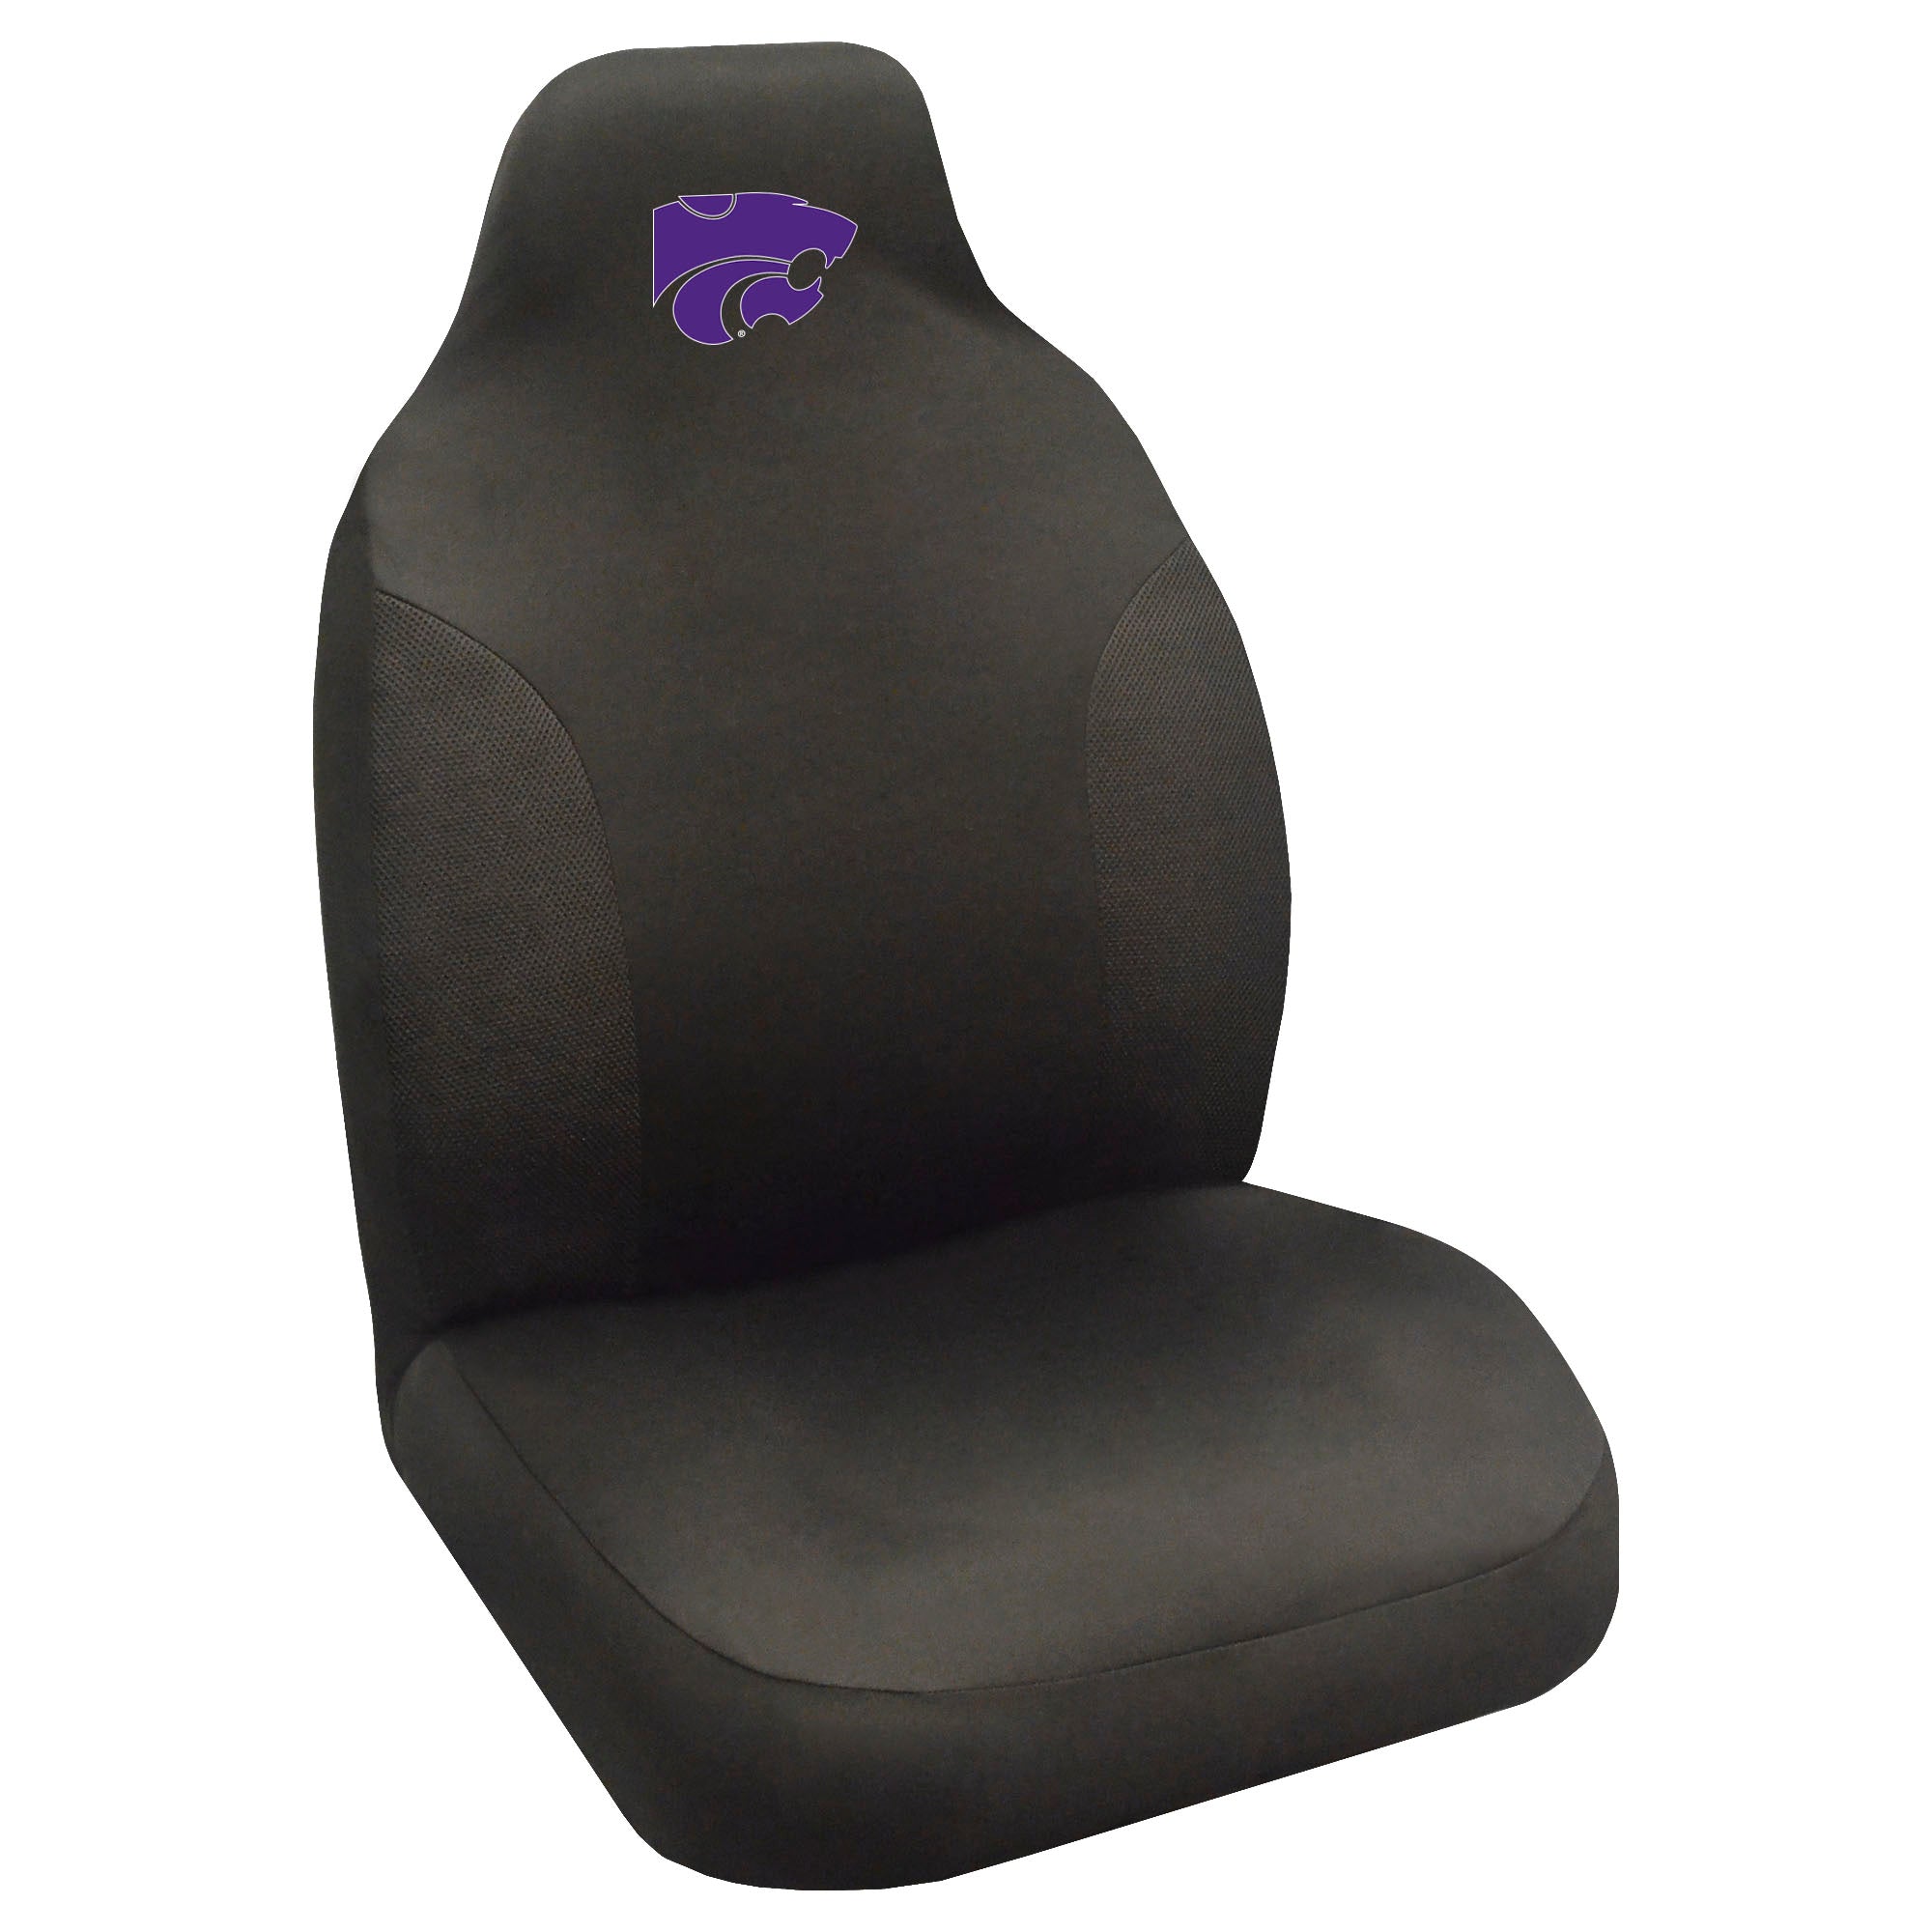 FANMATS, Kansas State University Embroidered Seat Cover